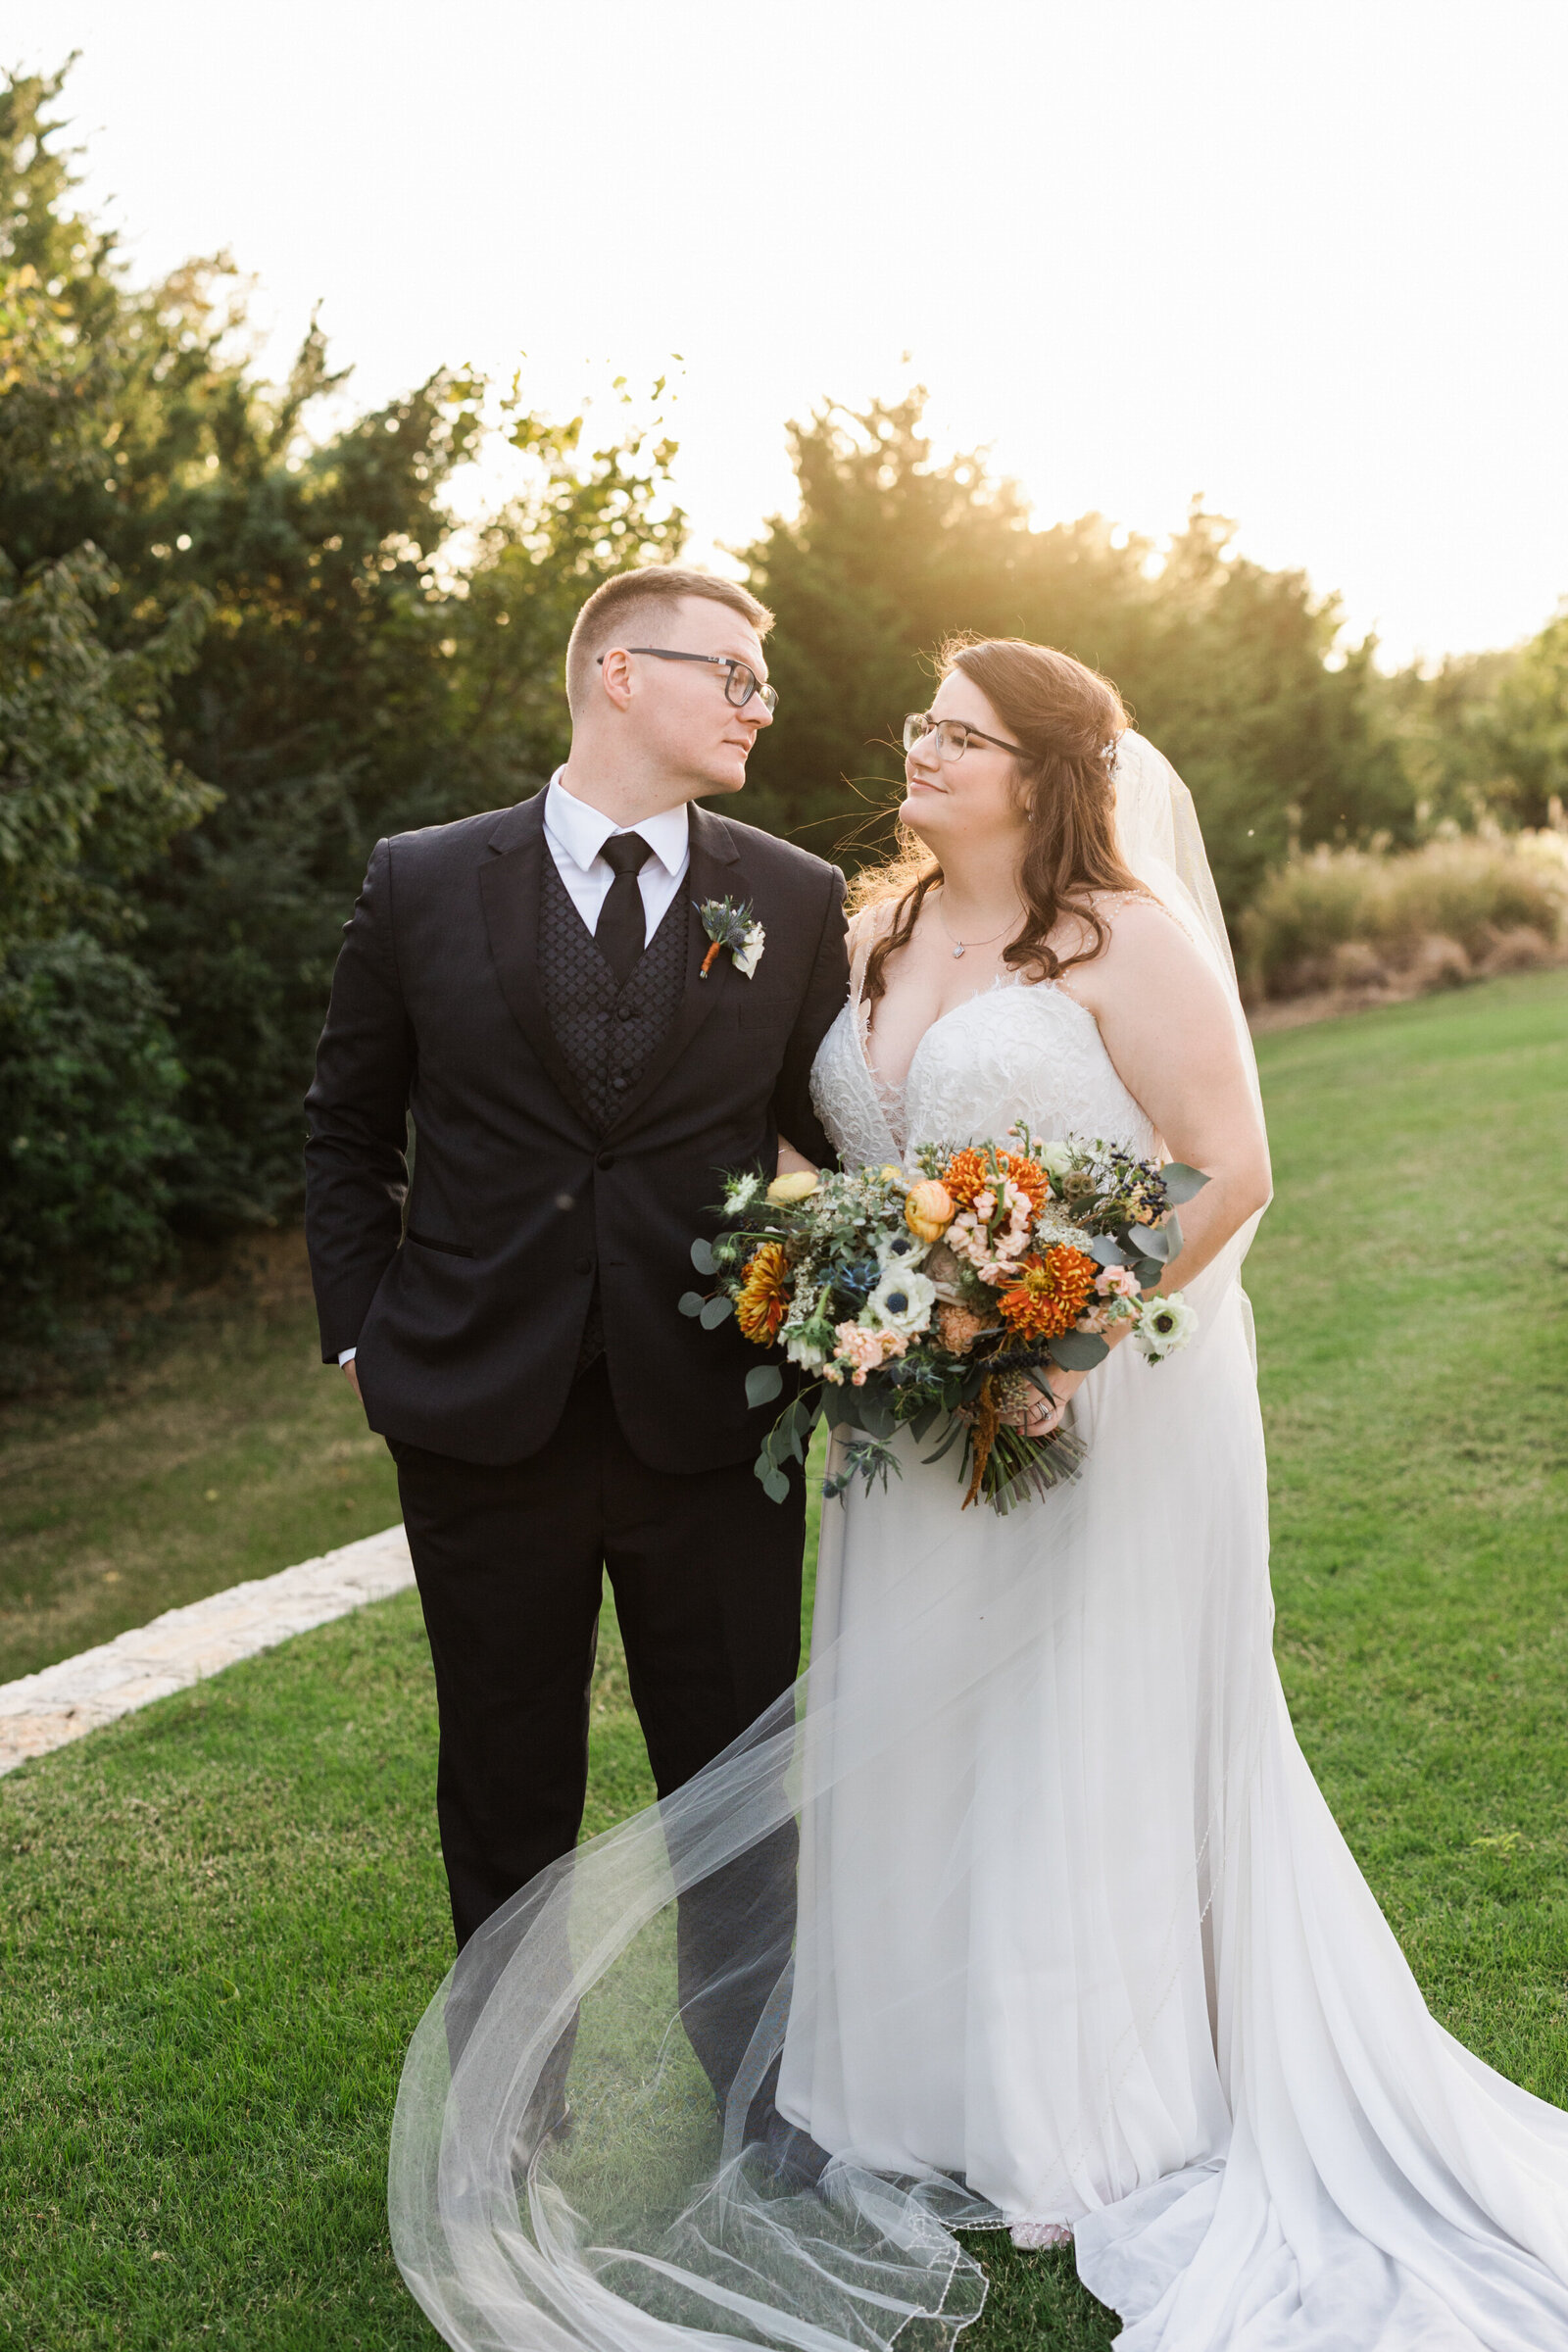 A romantic portrait of a bride and groom outside the Laurel Grapevine, Texas. The bride is on the right and is wearing a white dress with a long flowing veil and is holding a large bouquet. The groom is on the left and is wearing a black suit with a boutonniere.